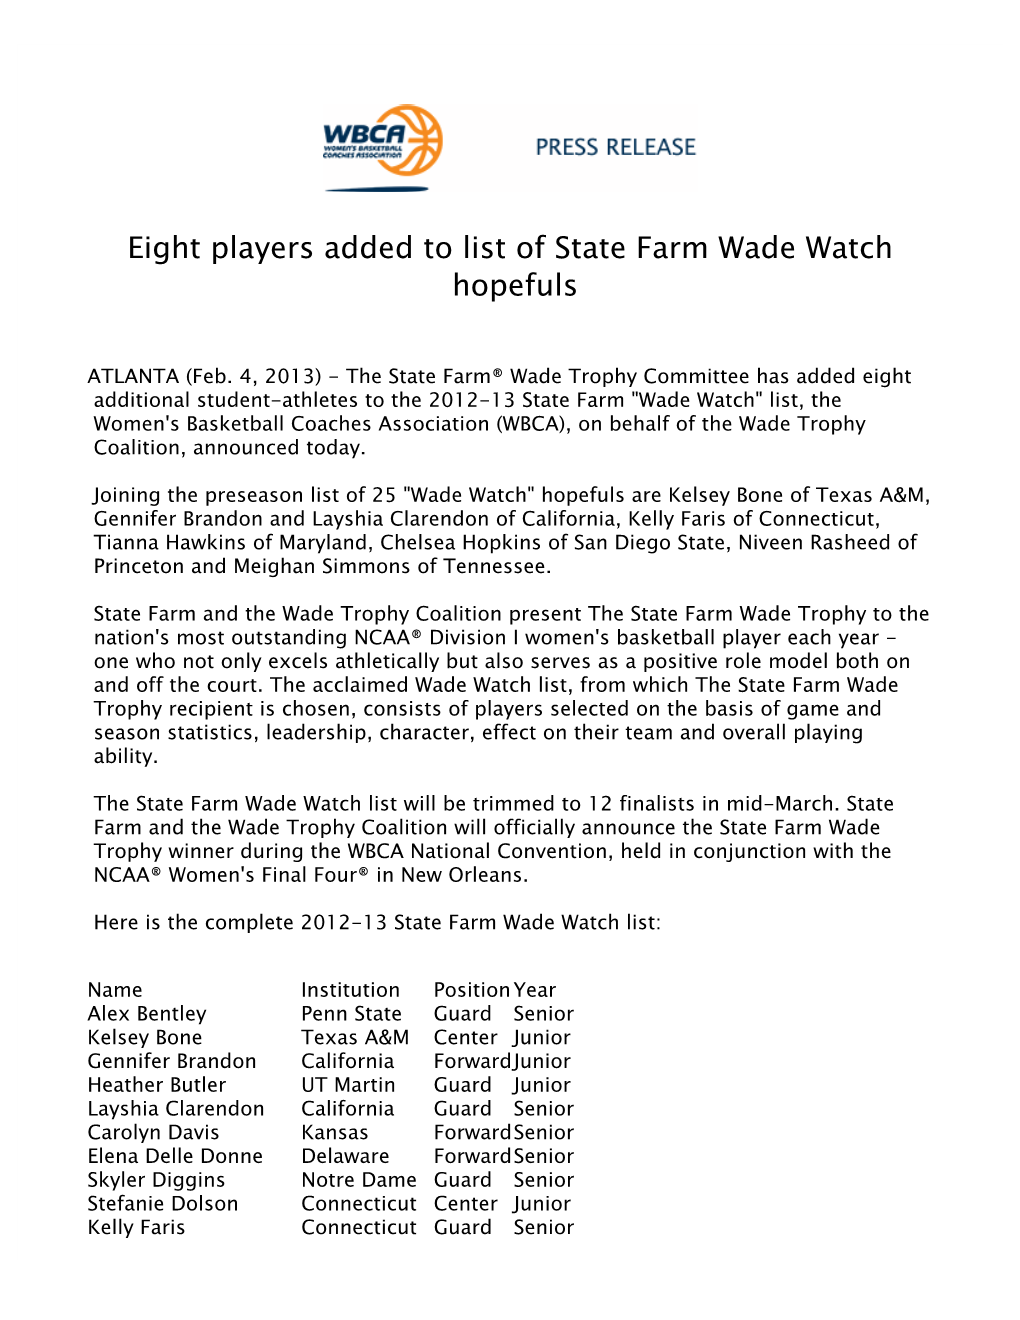 Eight Players Added to List of State Farm Wade Watch Hopefuls 2012-13 020413